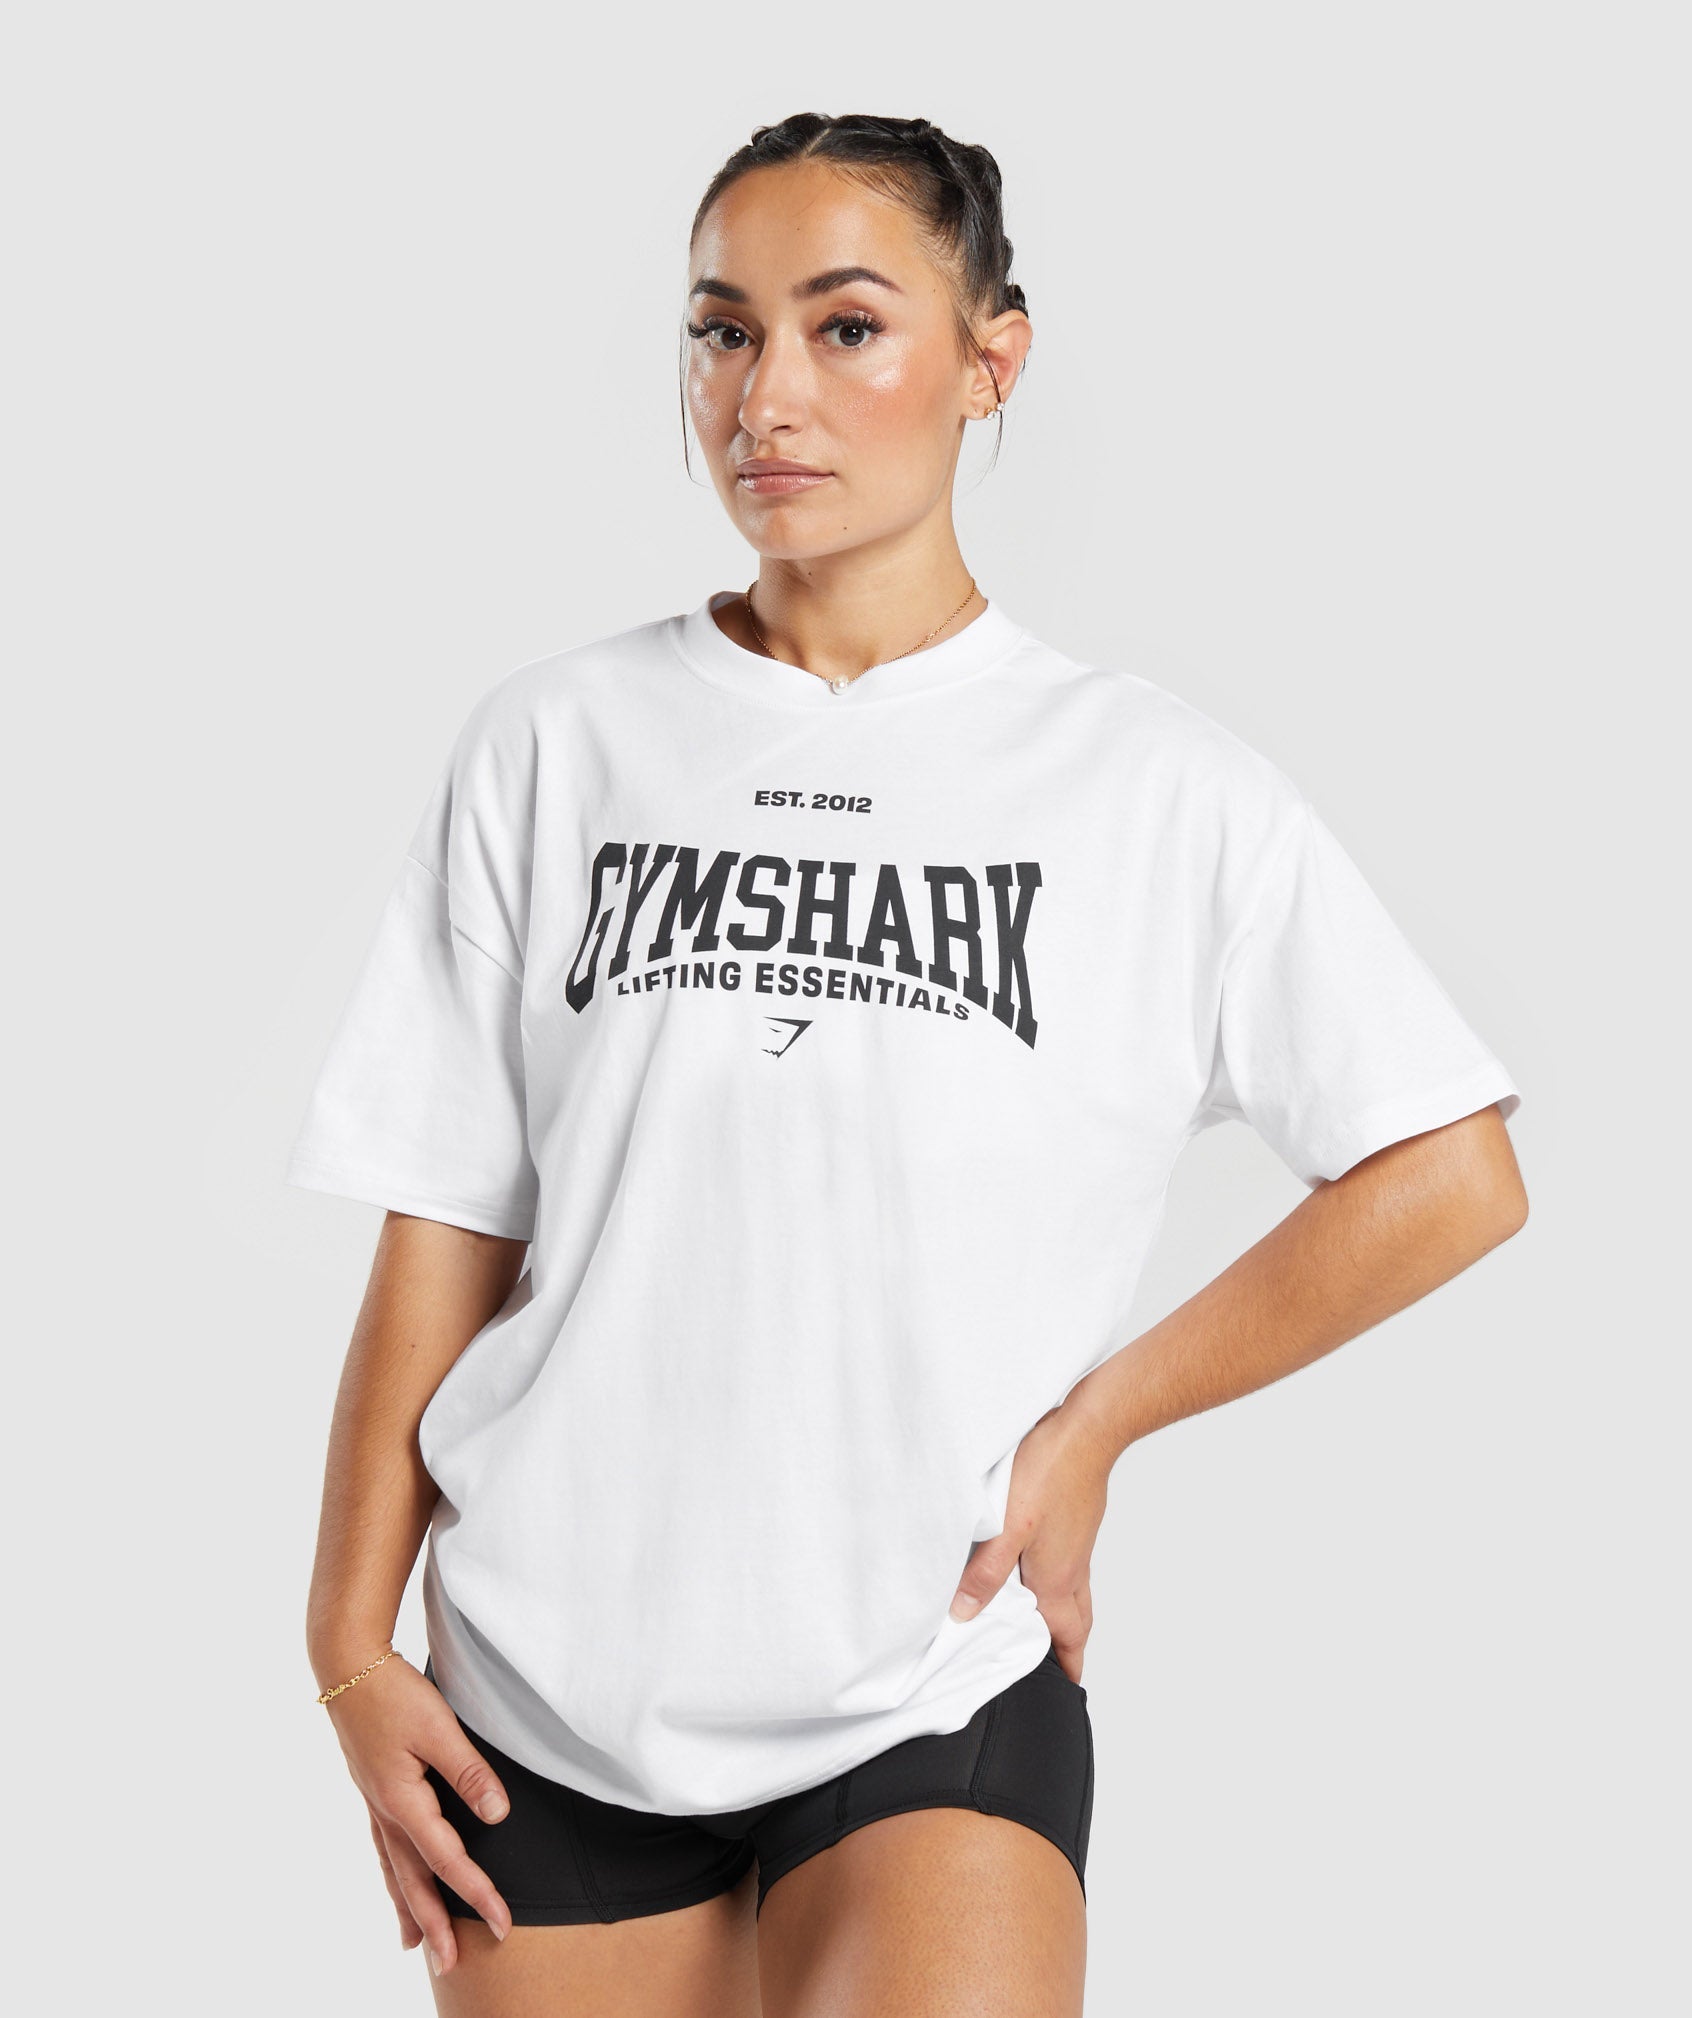 Lifting Essentials Oversized T-shirt in {{variantColor} is out of stock